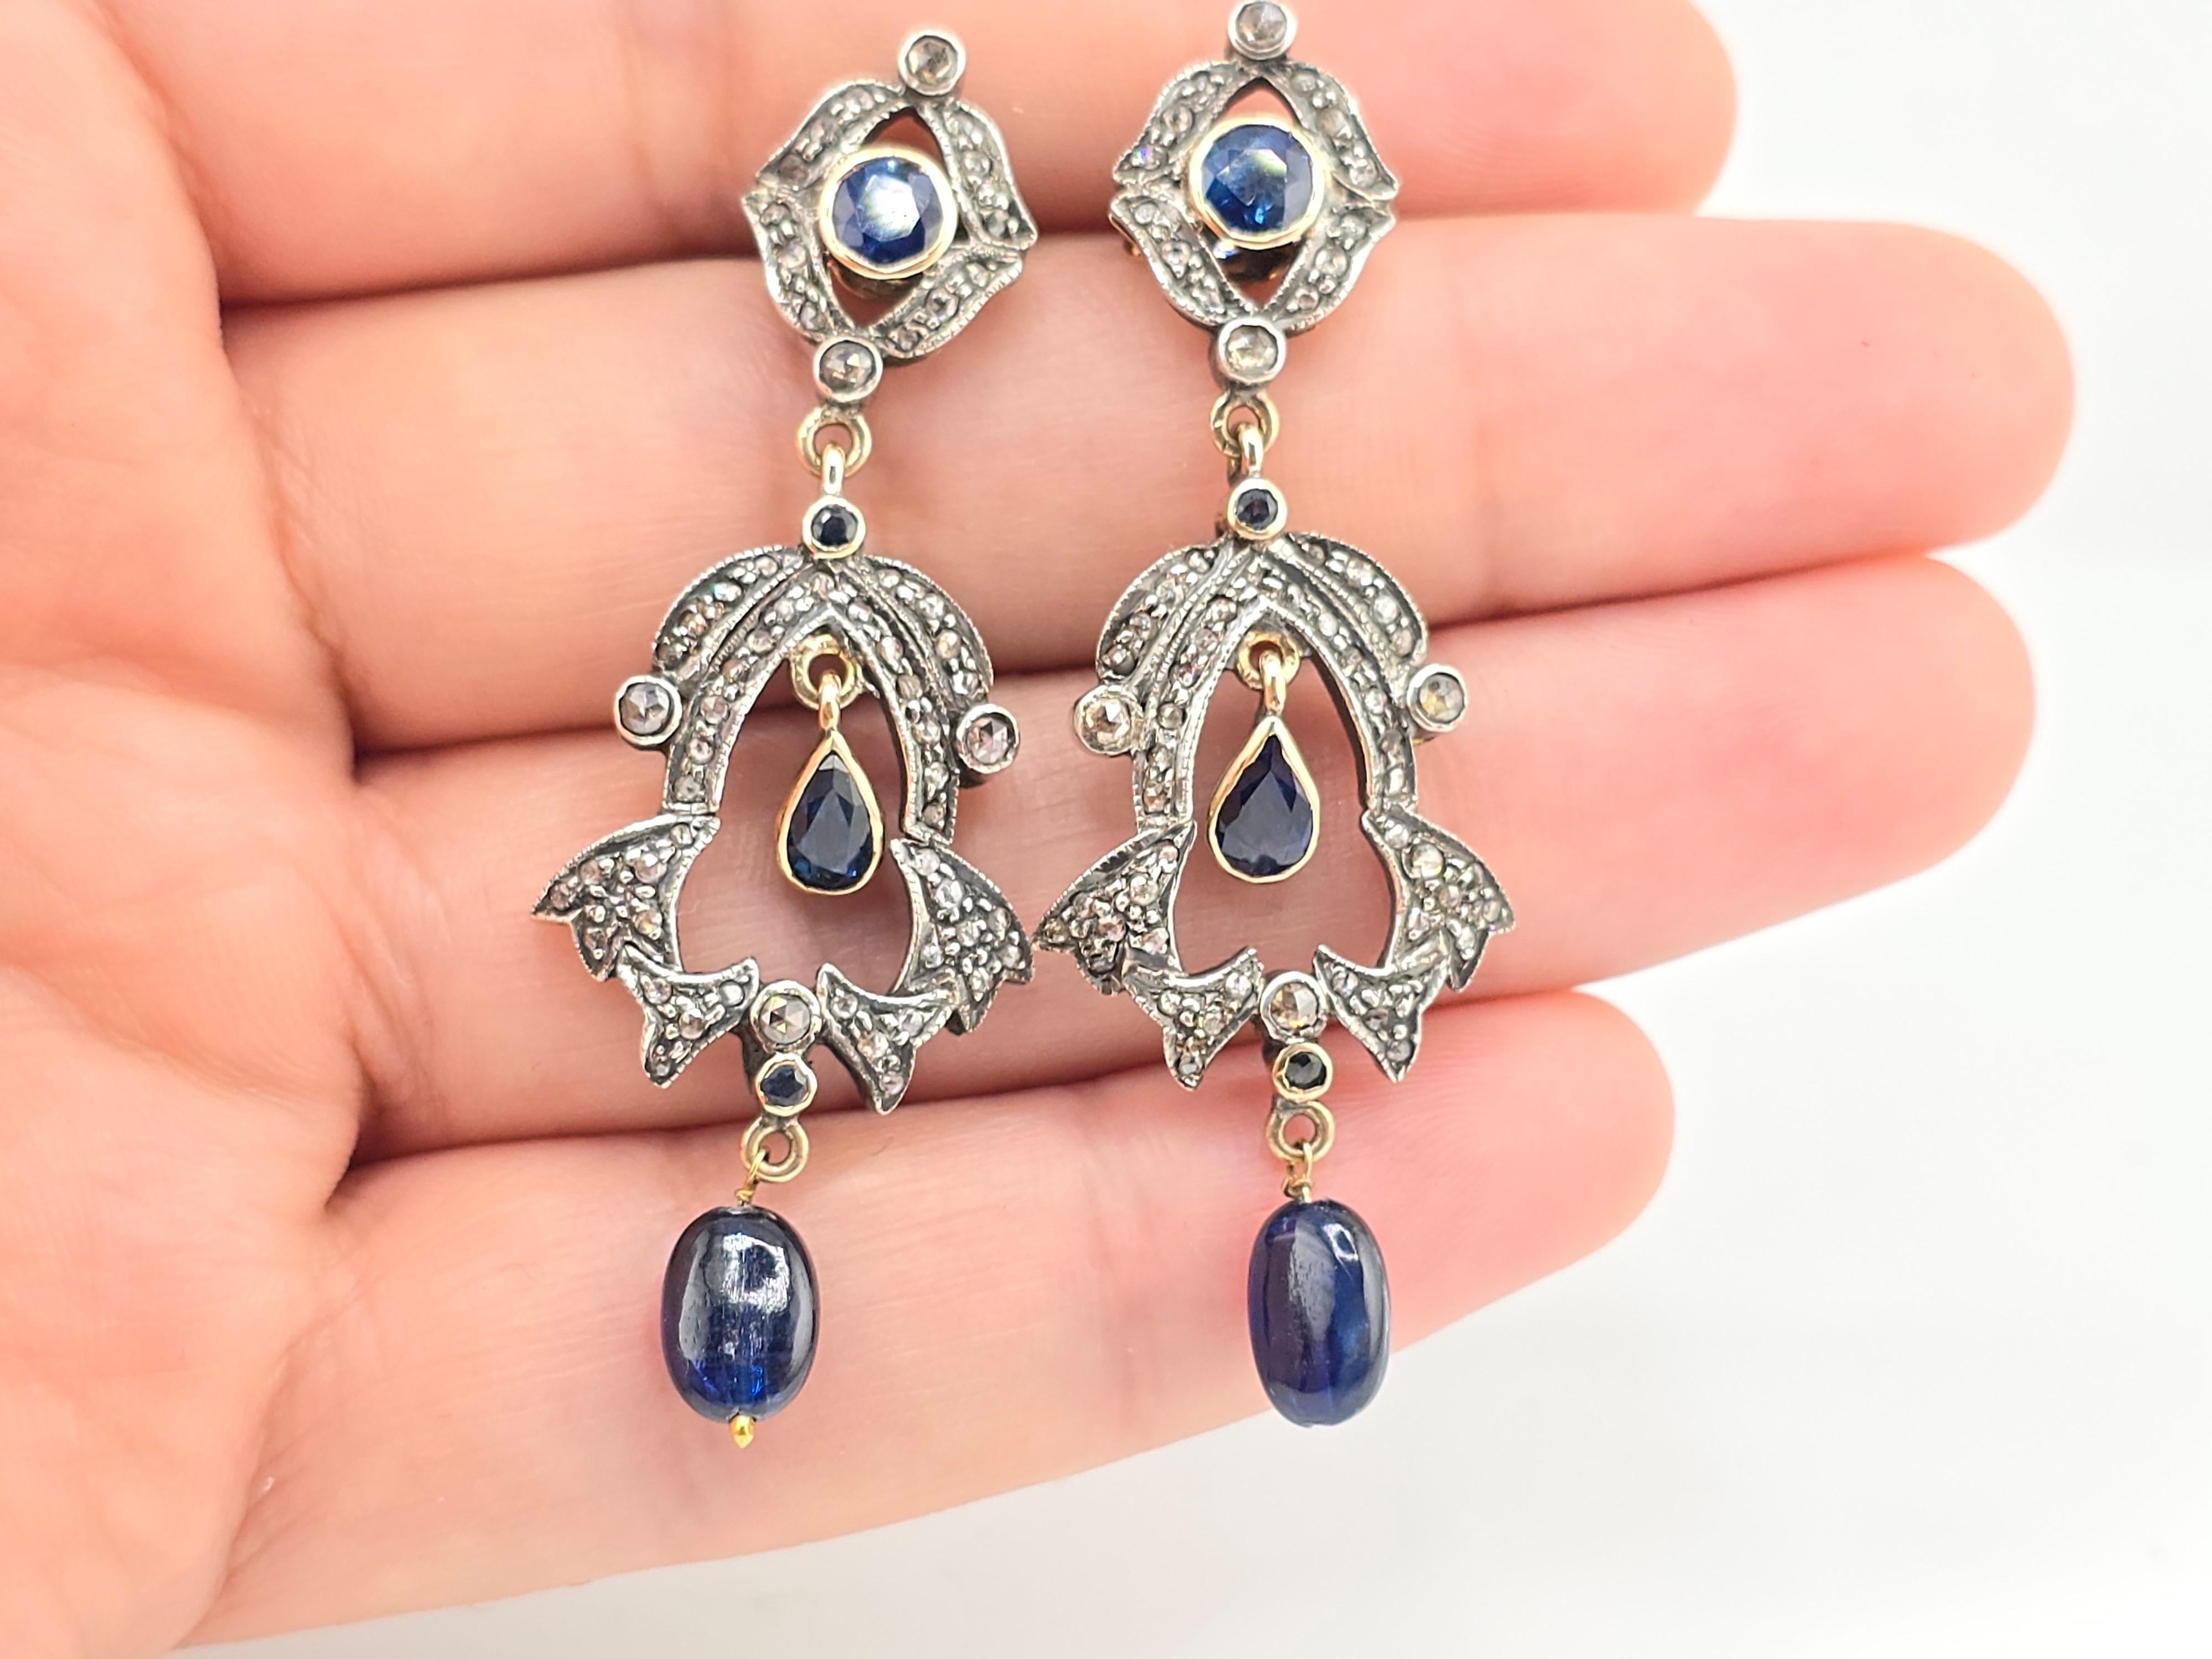 This is a gorgeous pair of diamond and sapphire, Victorian era earrings. There are diamond mine cuts all around the earrings, with beautiful, rich, vivid sapphires. The material I believe it is made out of 14 karat yellow gold and sterling silver.